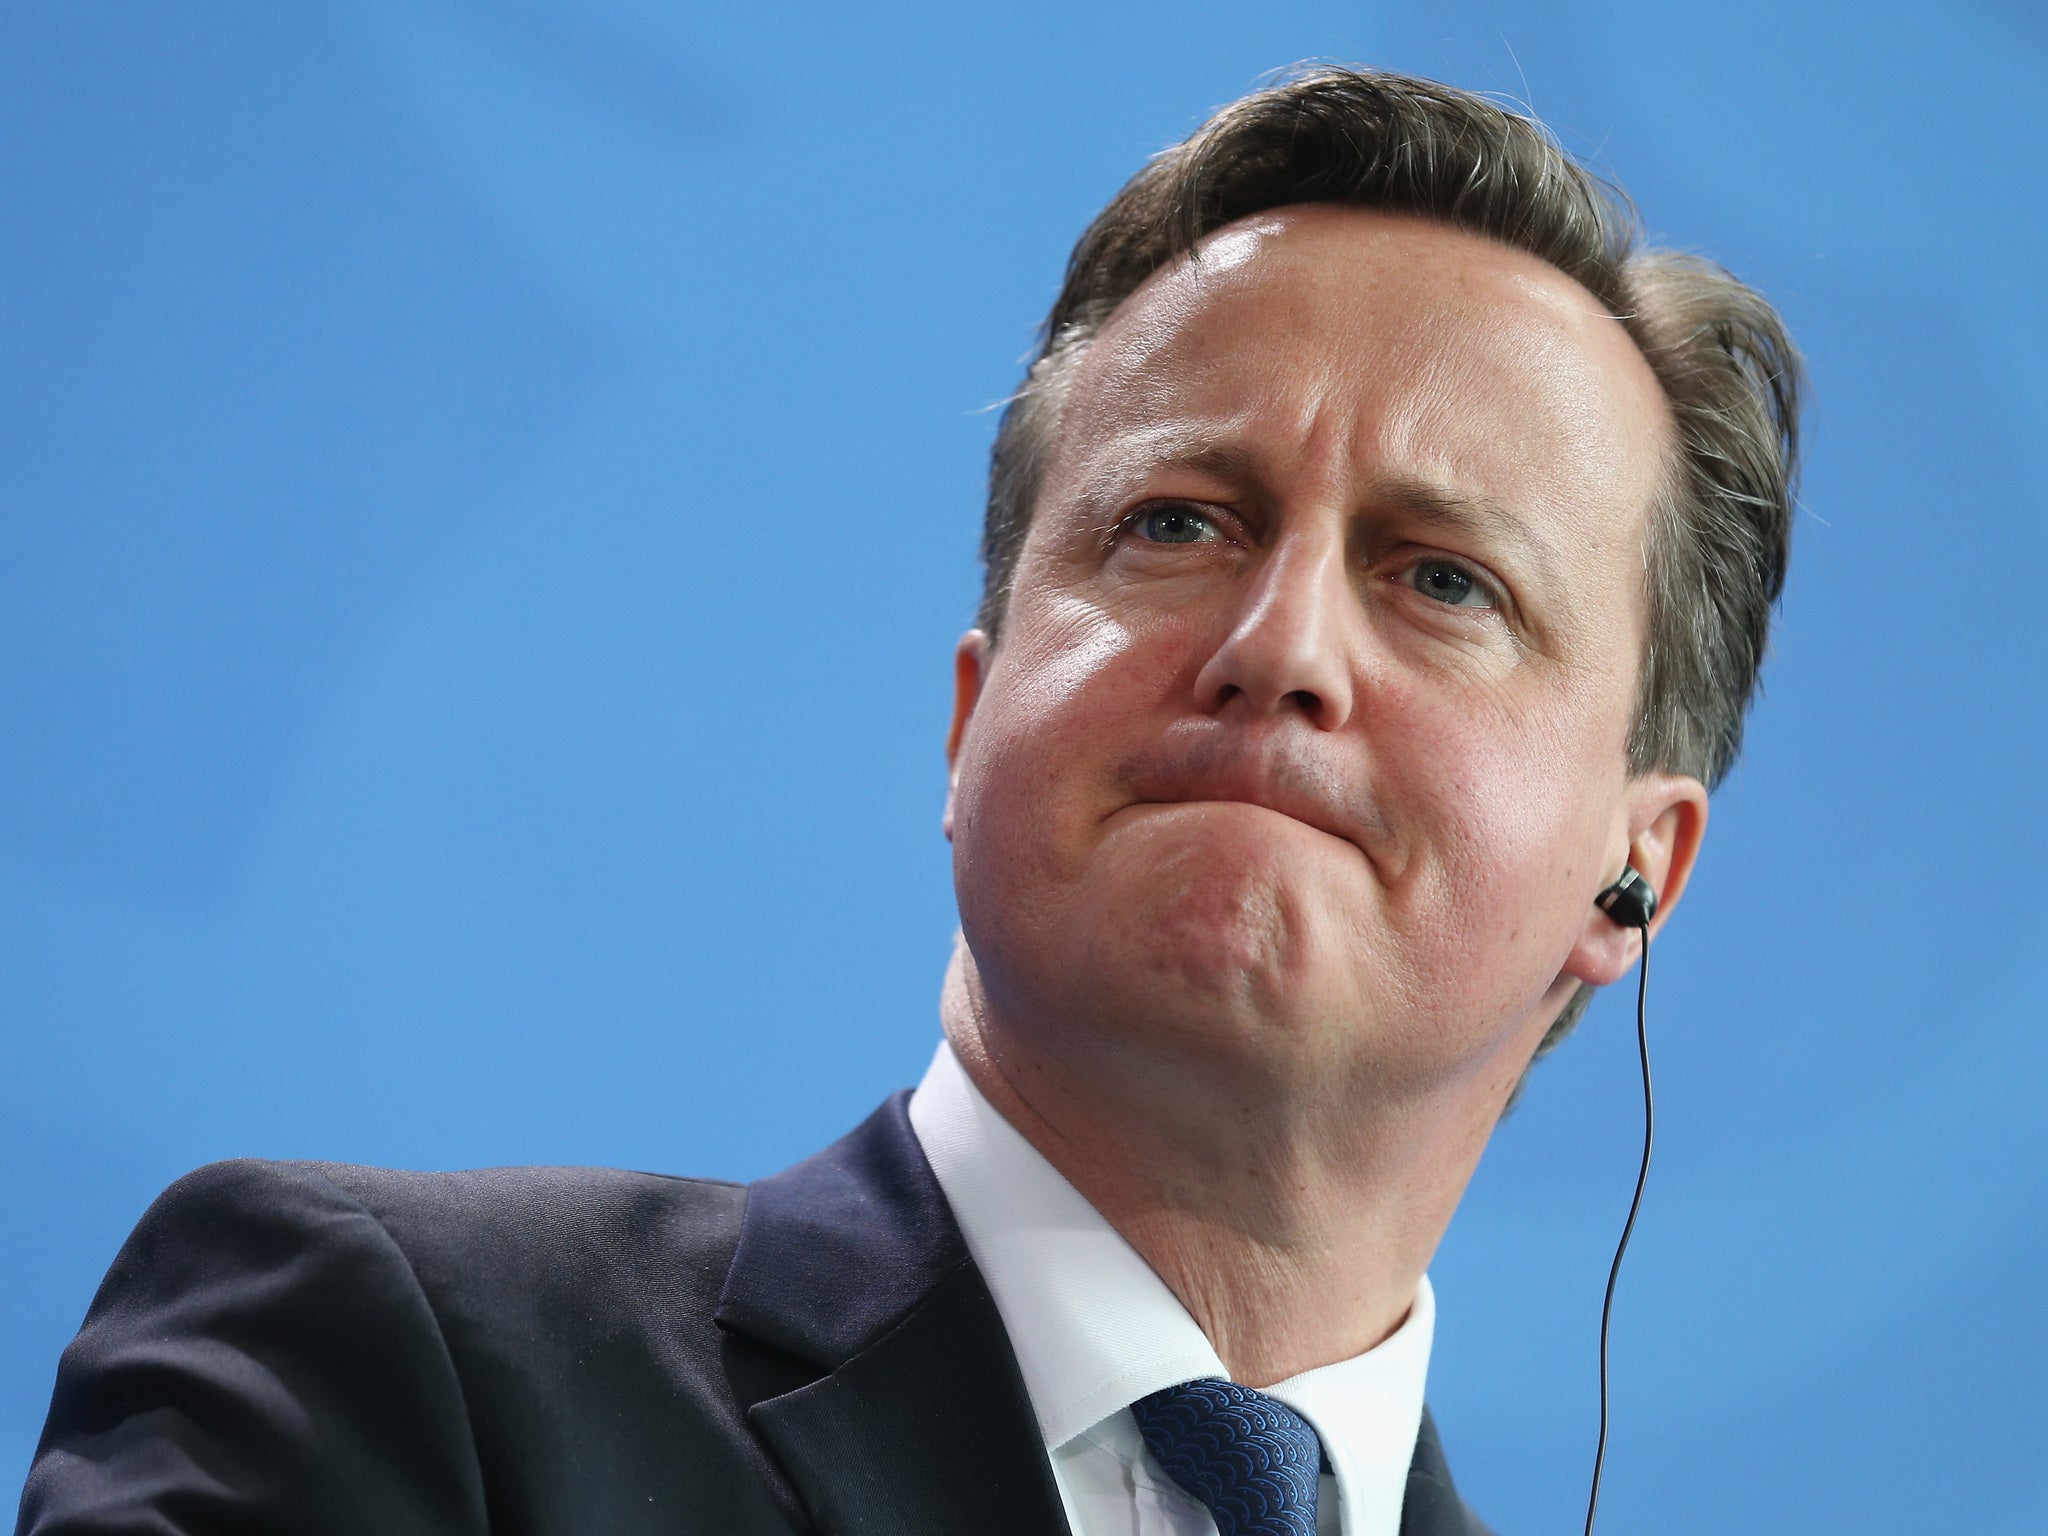 David Cameron thinks he was wanted by the KGB